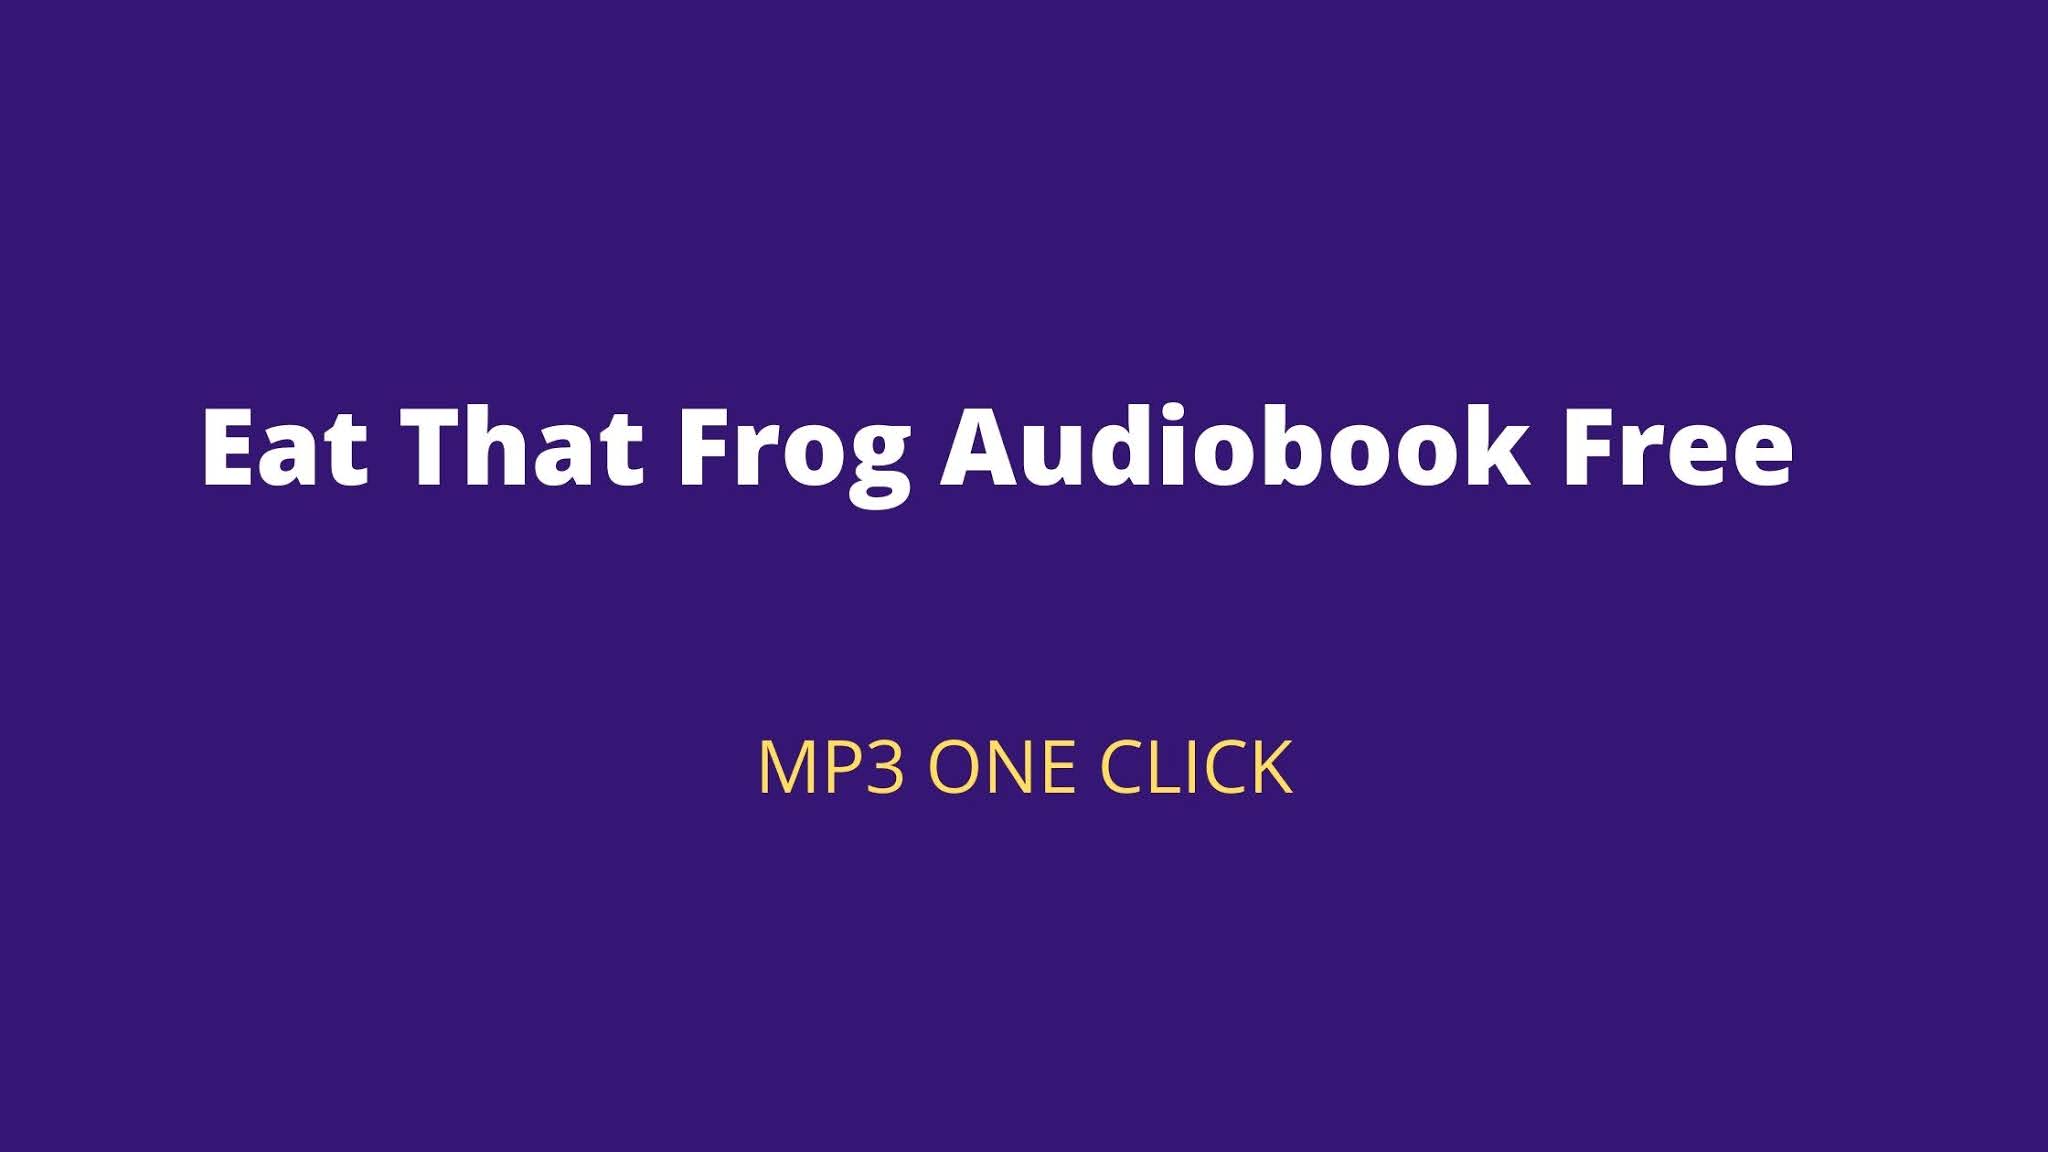 ▷Eat That Frog Audiobook Free Mp3【 One Click】